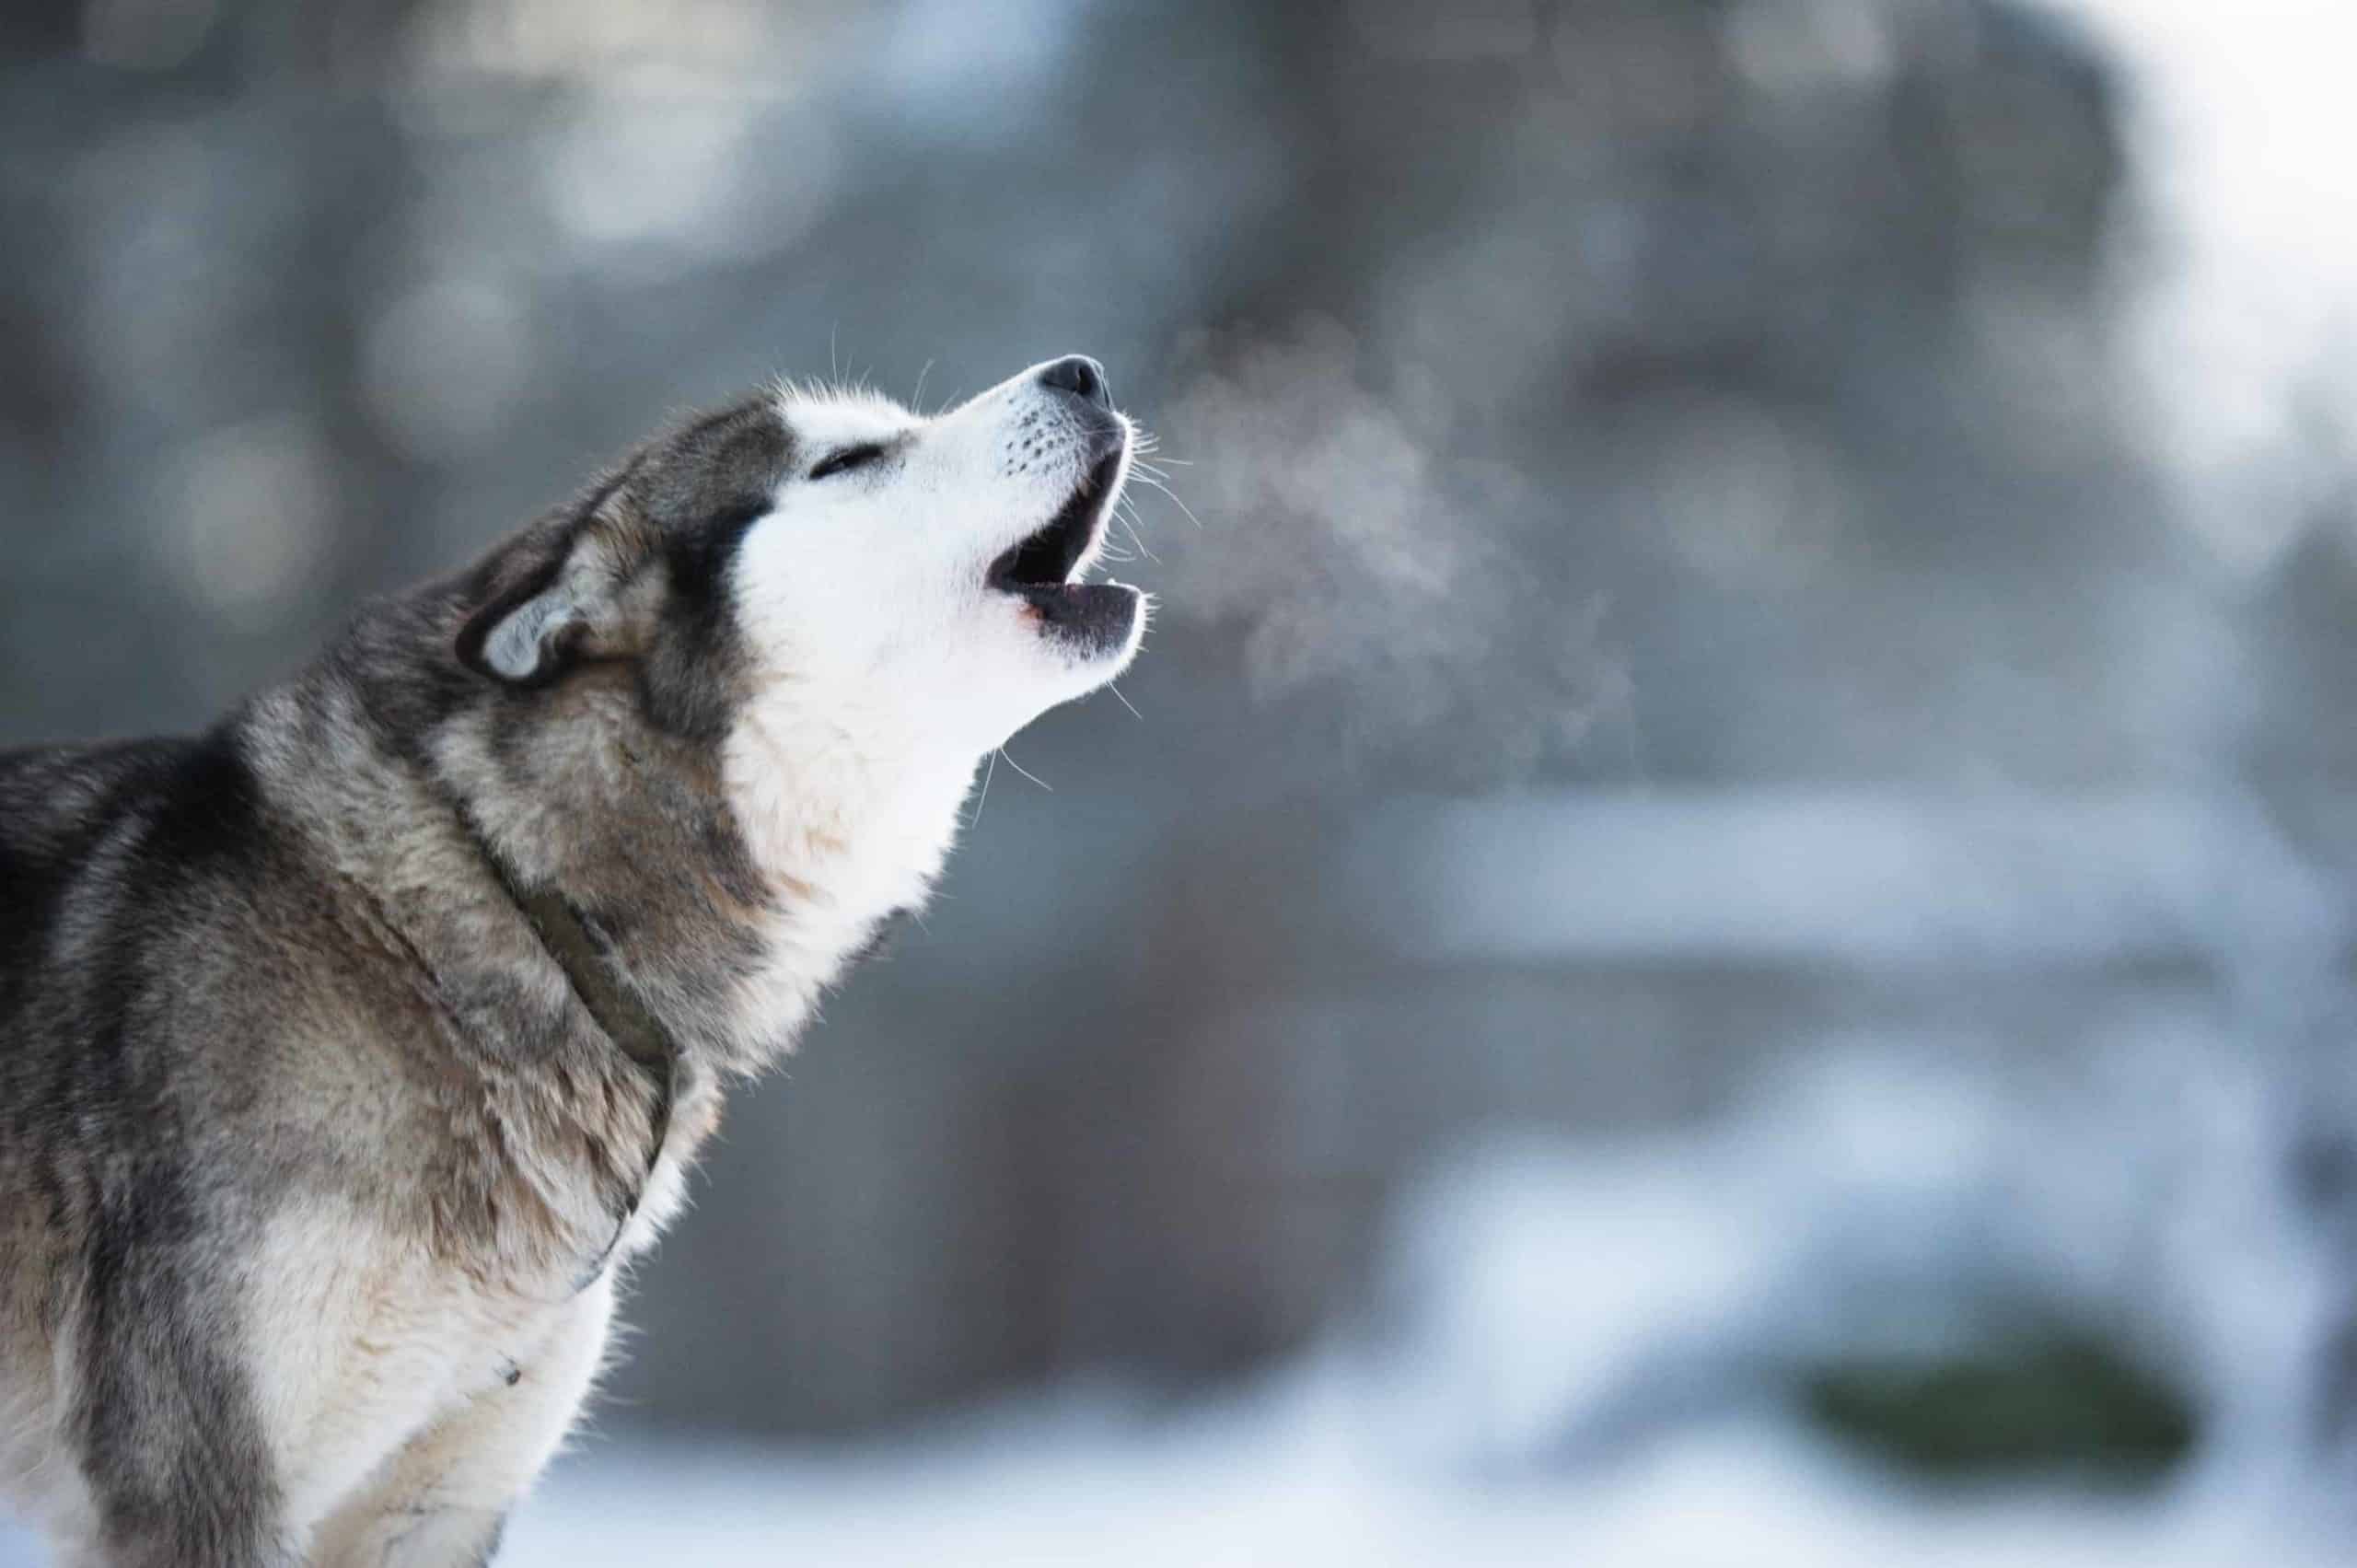 Husky dog howls. Let your dog howl: Howling sessions usually do not last long. Unless the howling disturbs you or your neighbors, let your dog make noise.